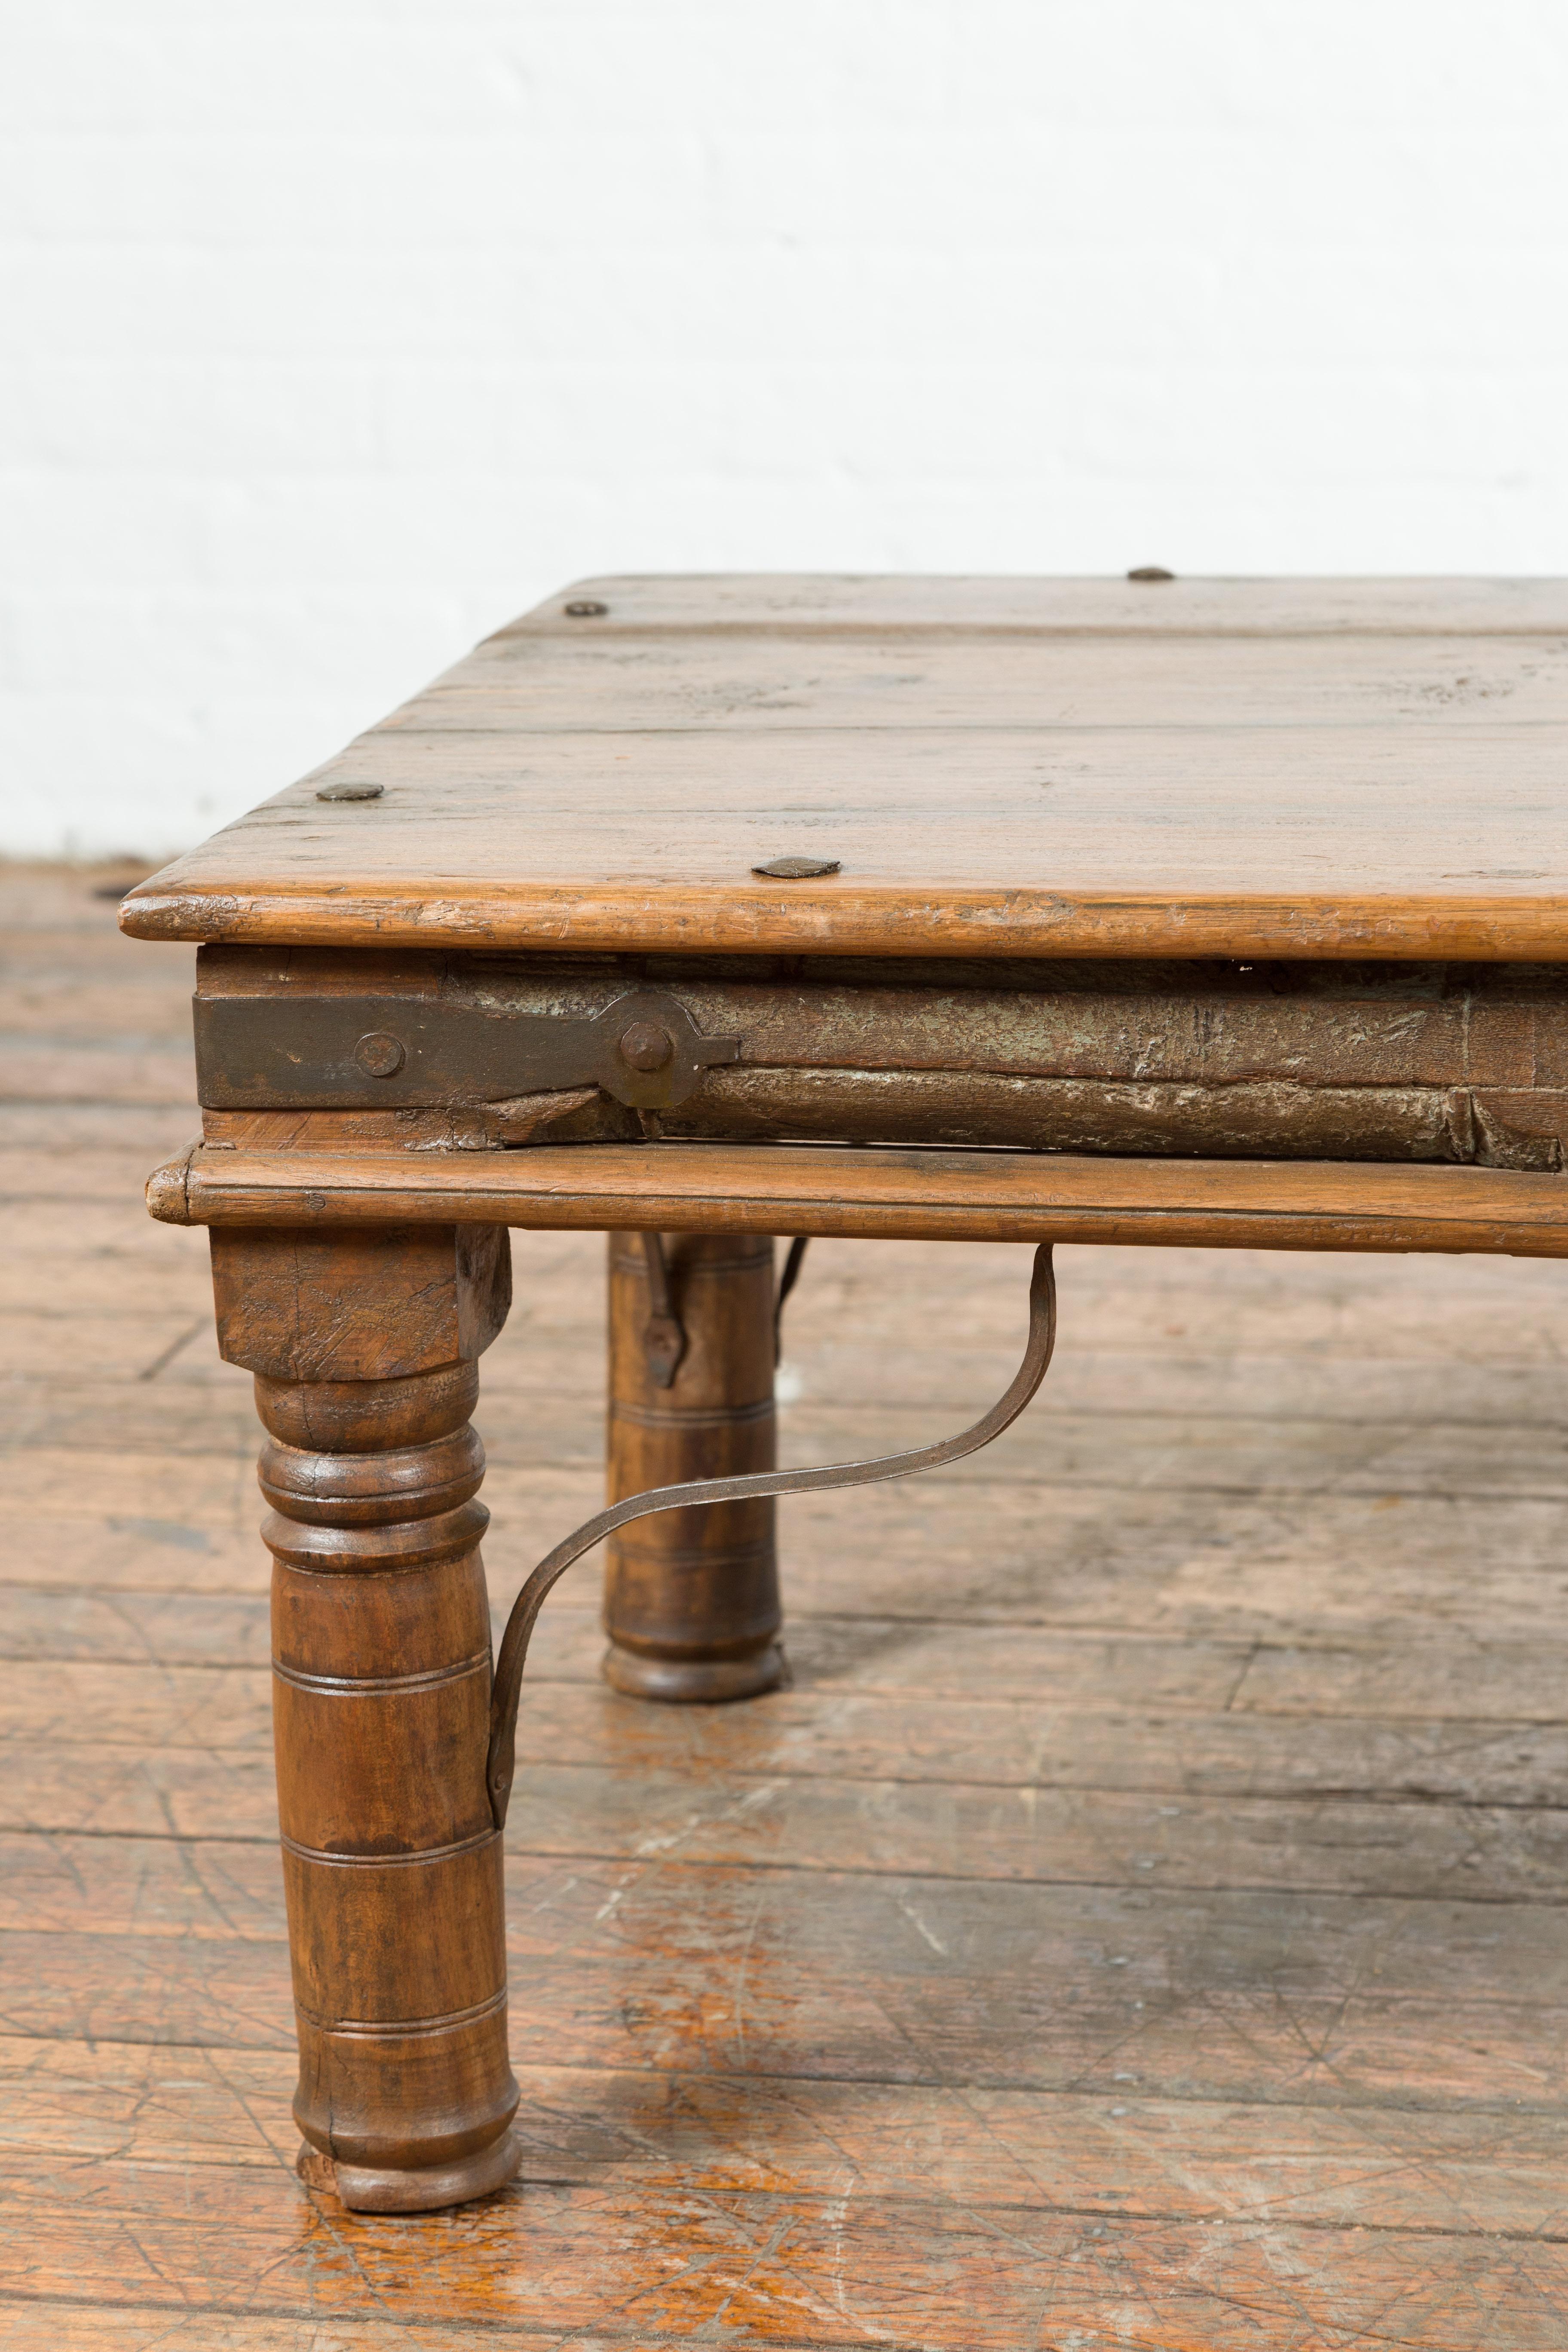 19th Century Rustic Indian Coffee Table with Painted Apron and Iron Accents 3